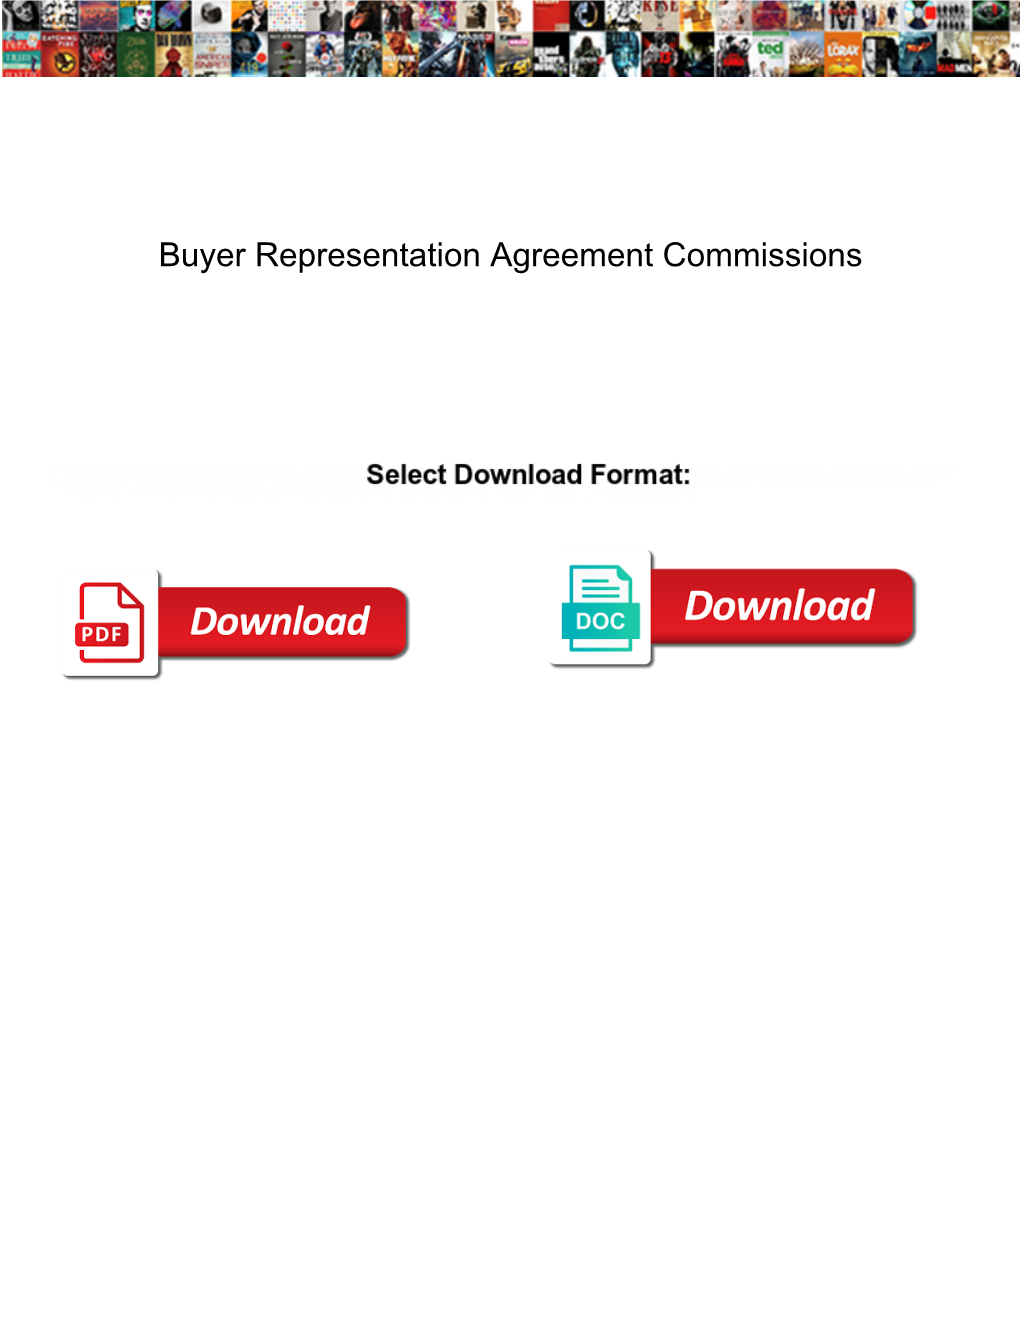 Buyer Representation Agreement Commissions